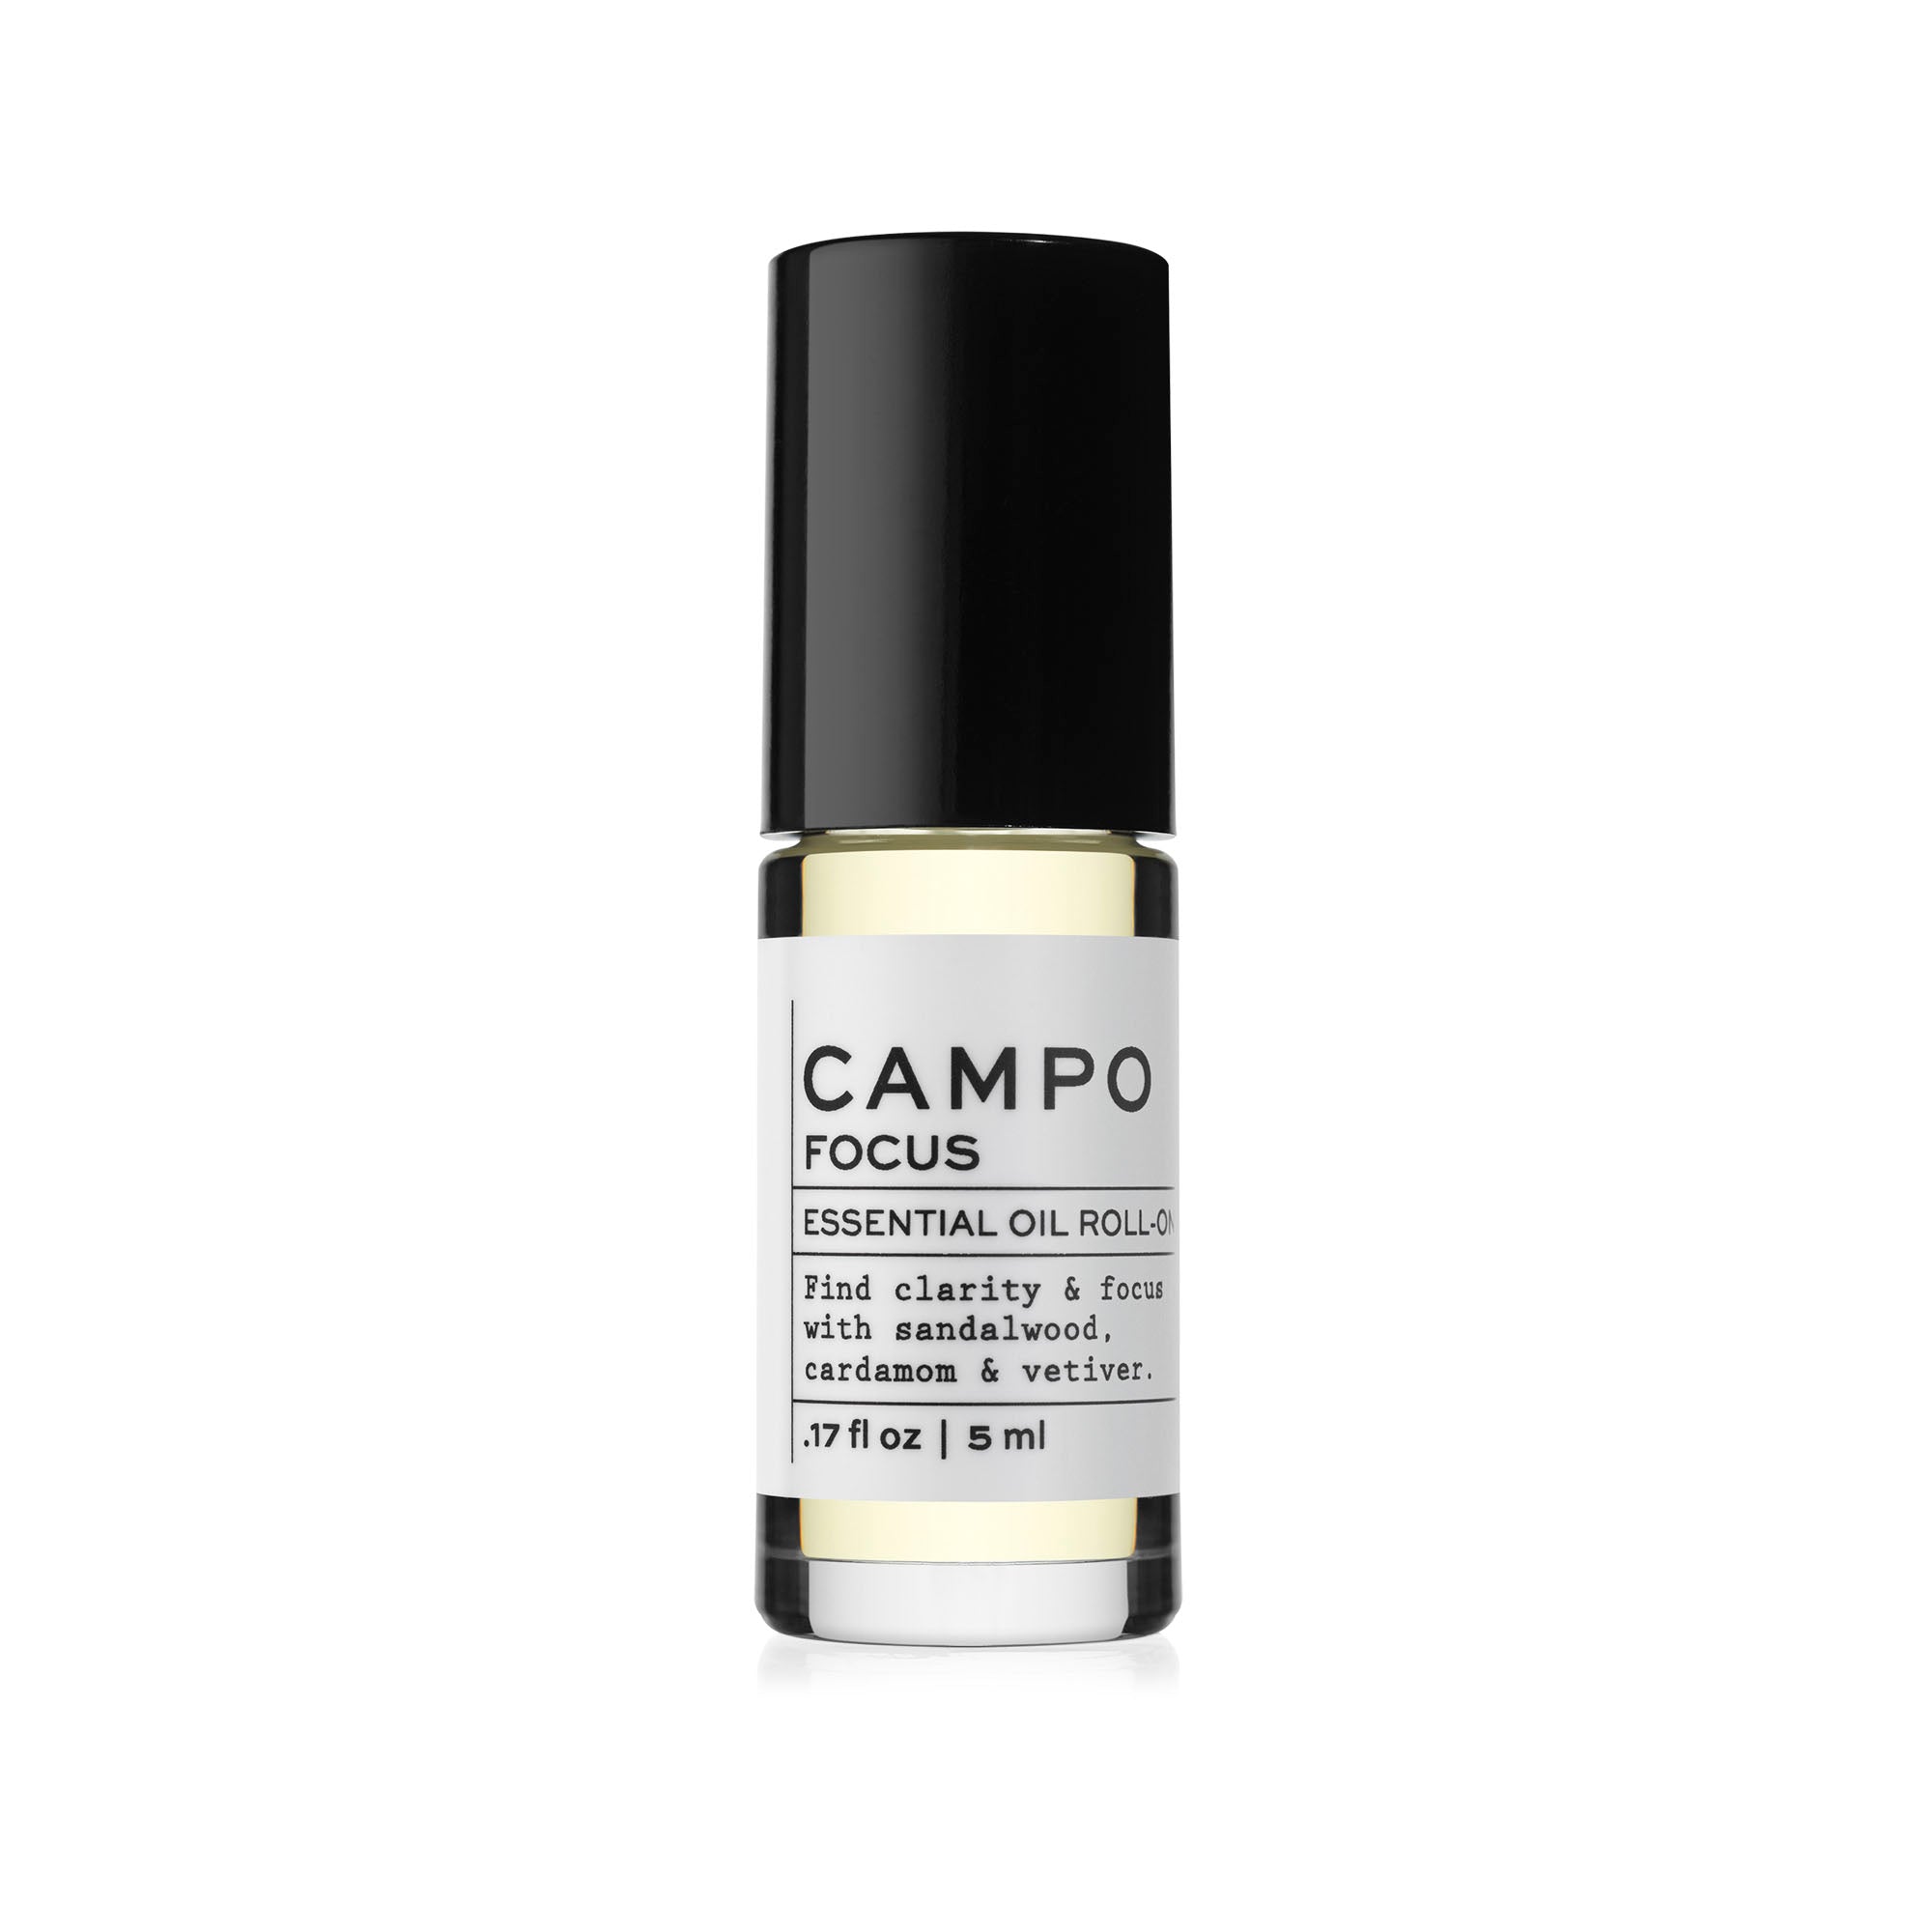 Campo Beauty Essential Oil FOCUS Blend Roll-On that in 5 ml. Inspires feelings of peace and tranquility to promote heightened awareness and mental clarity. Feel clarity and grounded with this 100% natural essential oil roll-on blend of Australian Sandalwood, Cardamom, Vetiver & Cedarwood Atlas, Himalayan, Texas & Virginia.